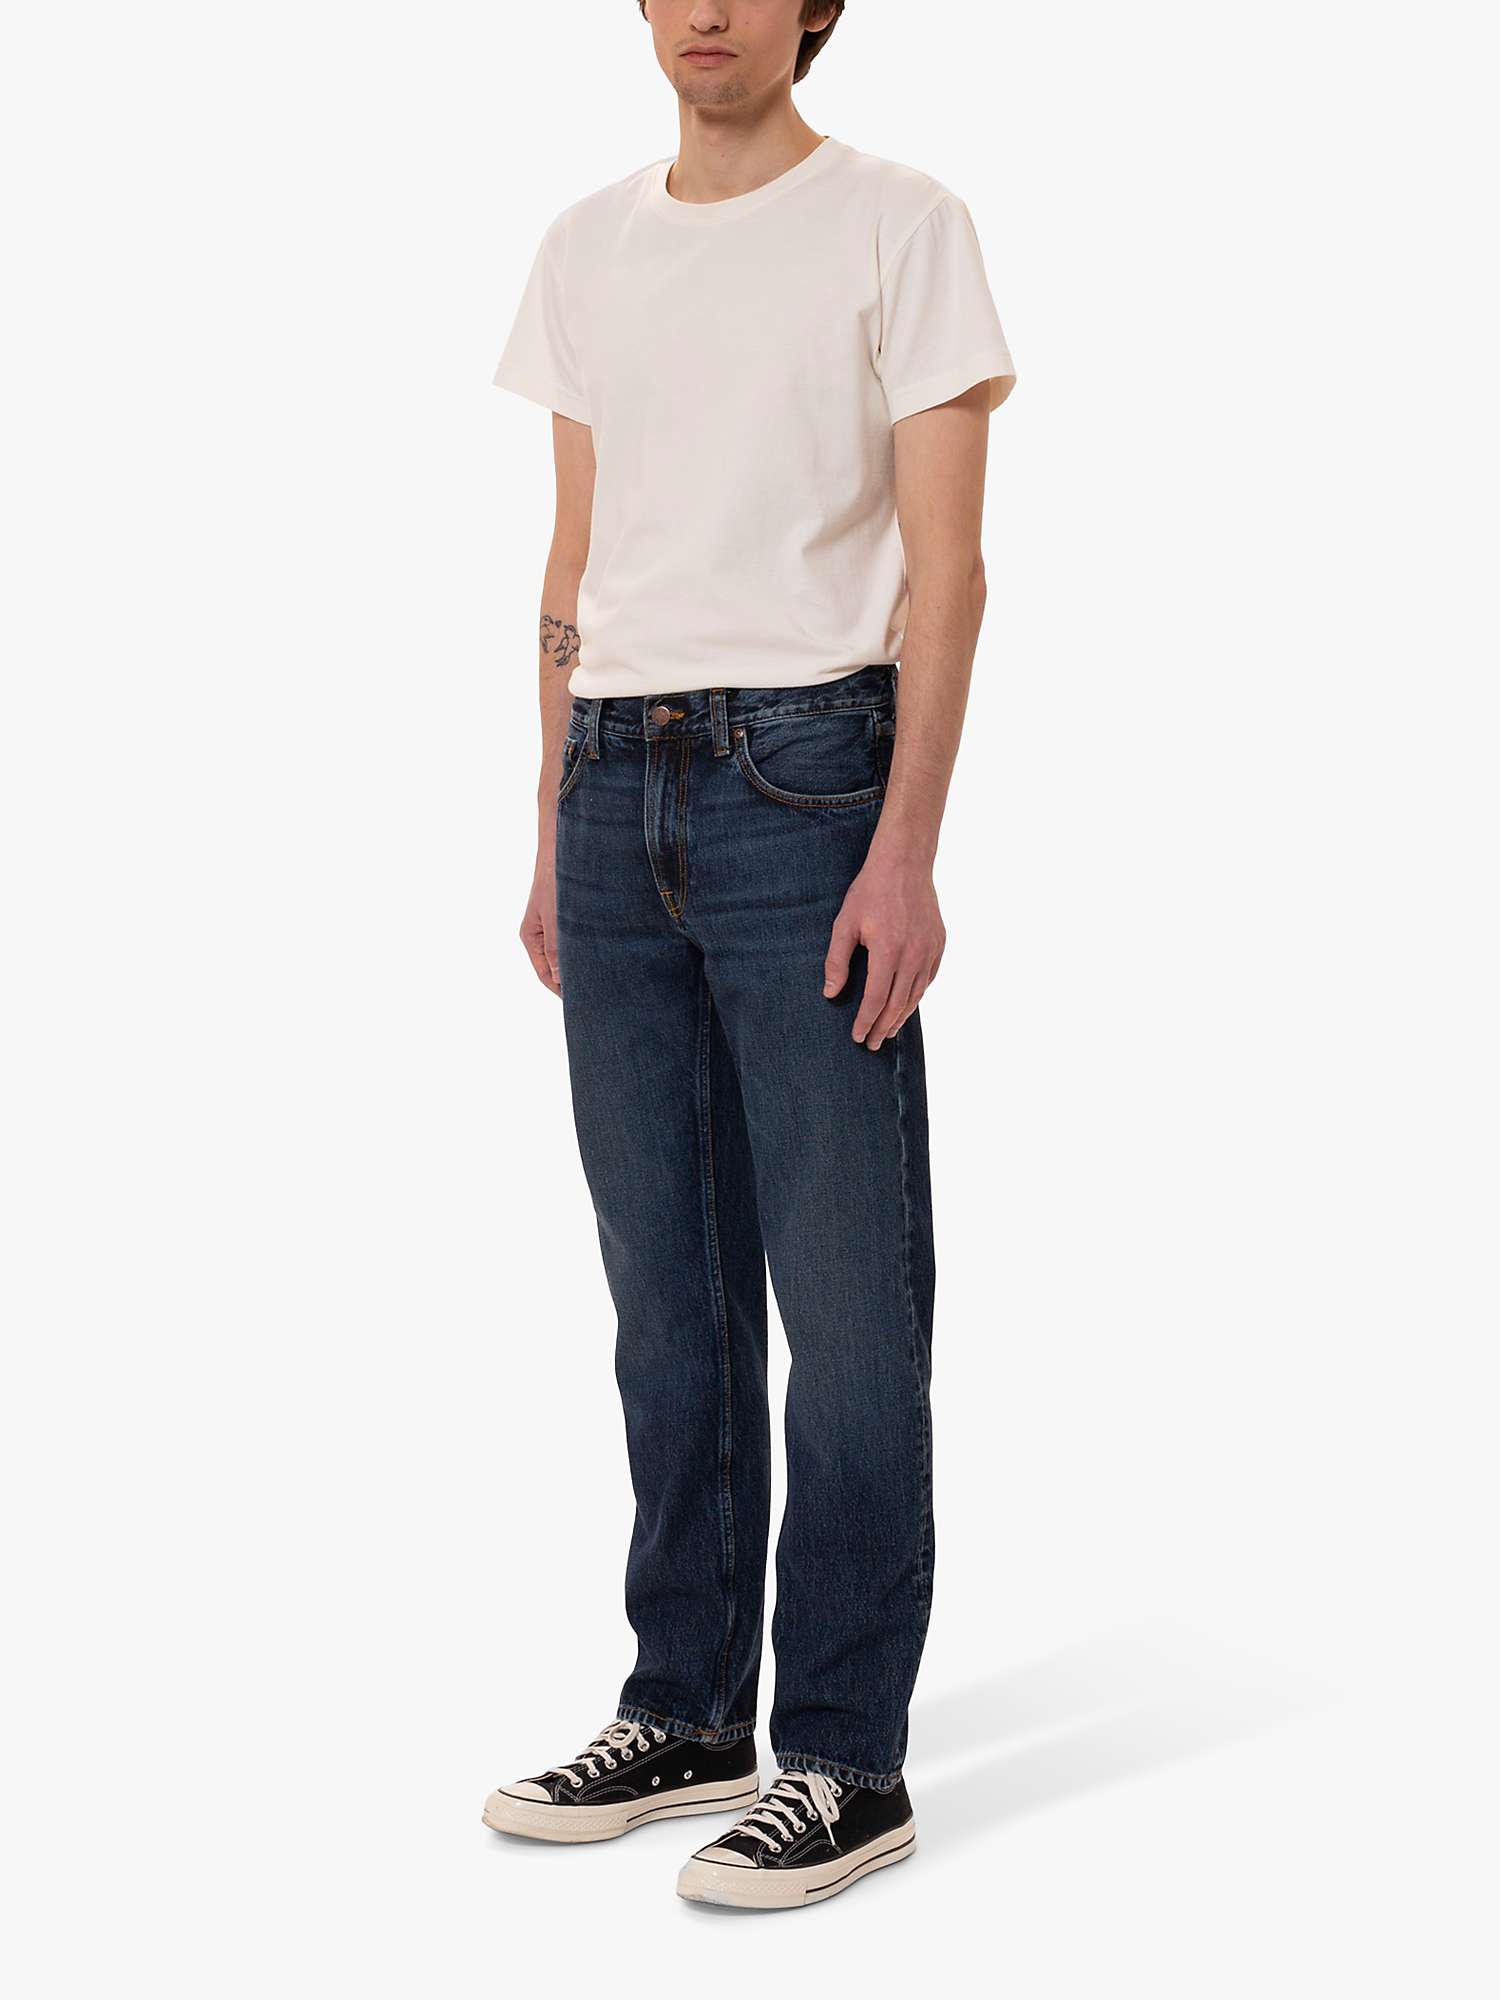 Buy Nudie Jeans Gritty Jackson Organic Cotton Regular Fit Jeans Online at johnlewis.com